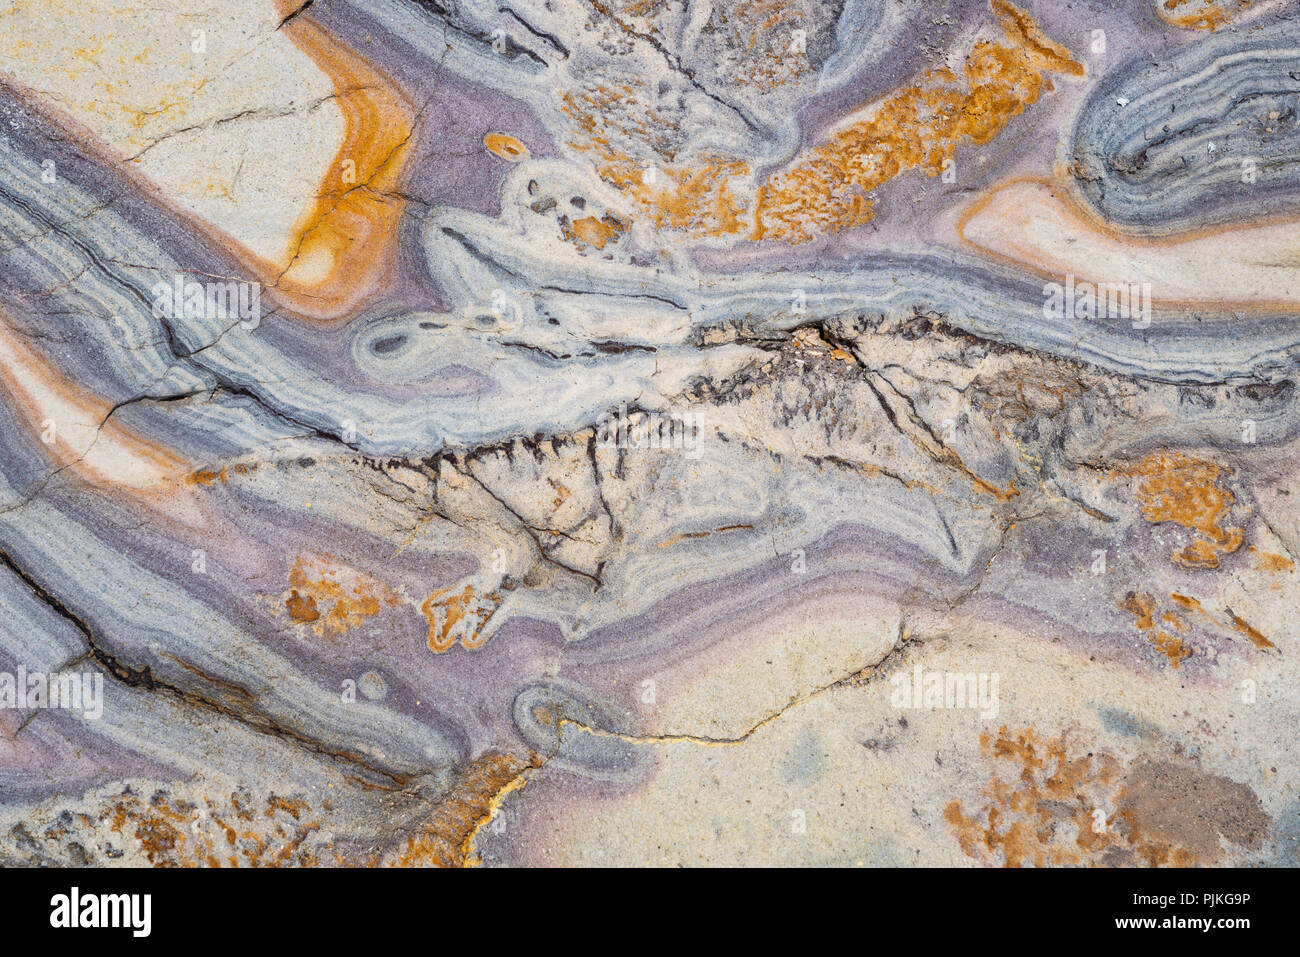 Colorful rock formation from a thermal spring in Yellowstone National Park, Wyoming. Stock Photo